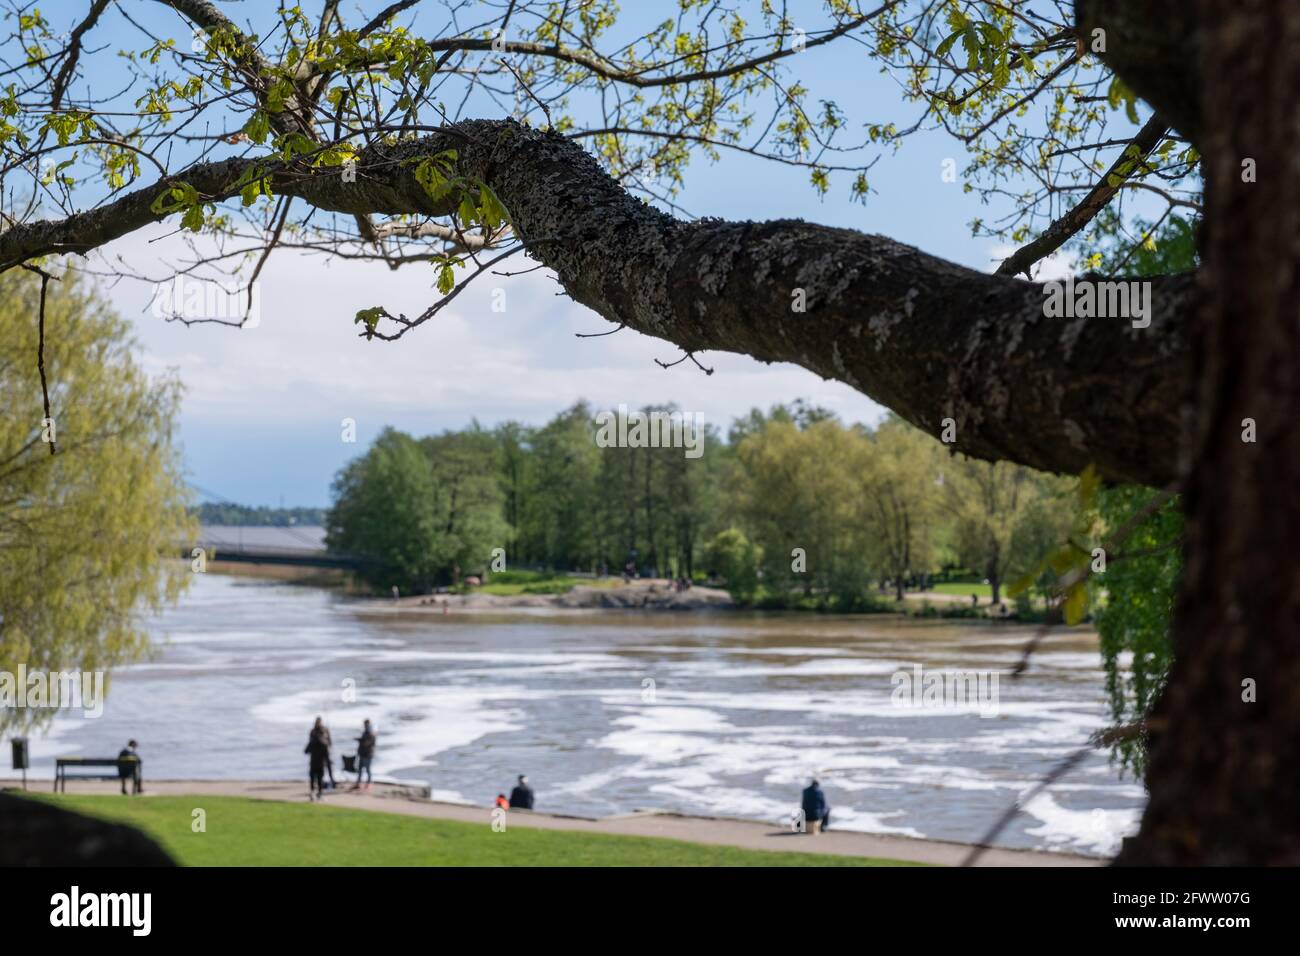 Helsinki / Finland - MAY 22, 2021: A closeup of a tree branch. People in the background enjoying the summer day. Stock Photo